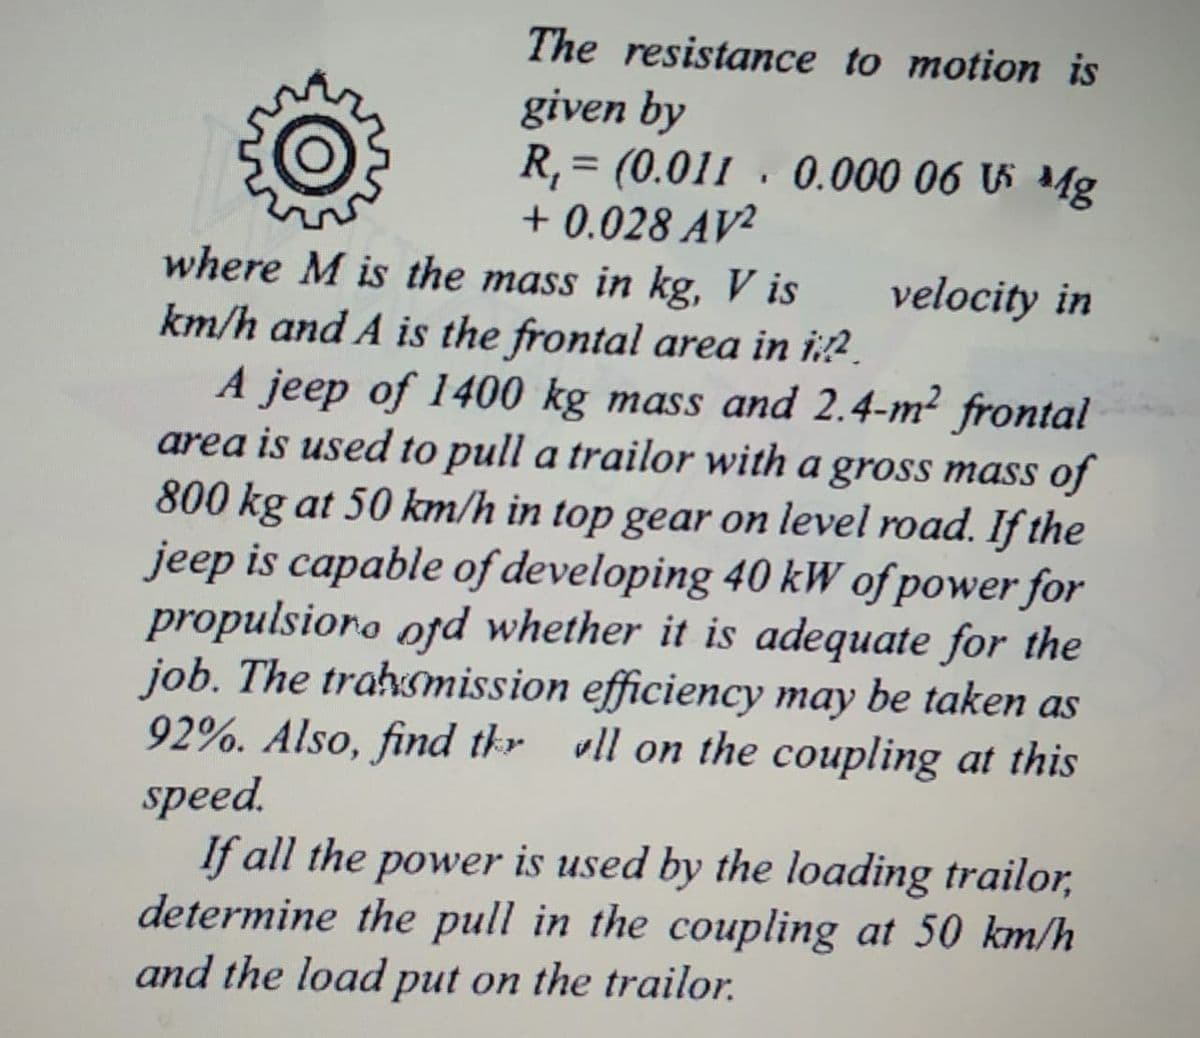 The resistance to motion is
given by
R, = (0.011 · 0.000 06 5 Mg
+ 0.028 AV²
where M is the mass in kg, V is
velocity in
km/h and A is the frontal area in i:?.
A jeep of 1400 kg mass and 2.4-m² frontal
area is used to pull a trailor with a gross mass of
800 kg at 50 km/h in top gear on level road. If the
jeep is capable of developing 40 kW of power for
propulsioro ofd whether it is adequate for the
job. The trałvsmission efficiency may be taken as
92%. Also, find tkr vll on the coupling at this
speed.
If all the power is used by the loading trailor,
determine the pull in the coupling at 50 km/h
and the load put on the trailor.
